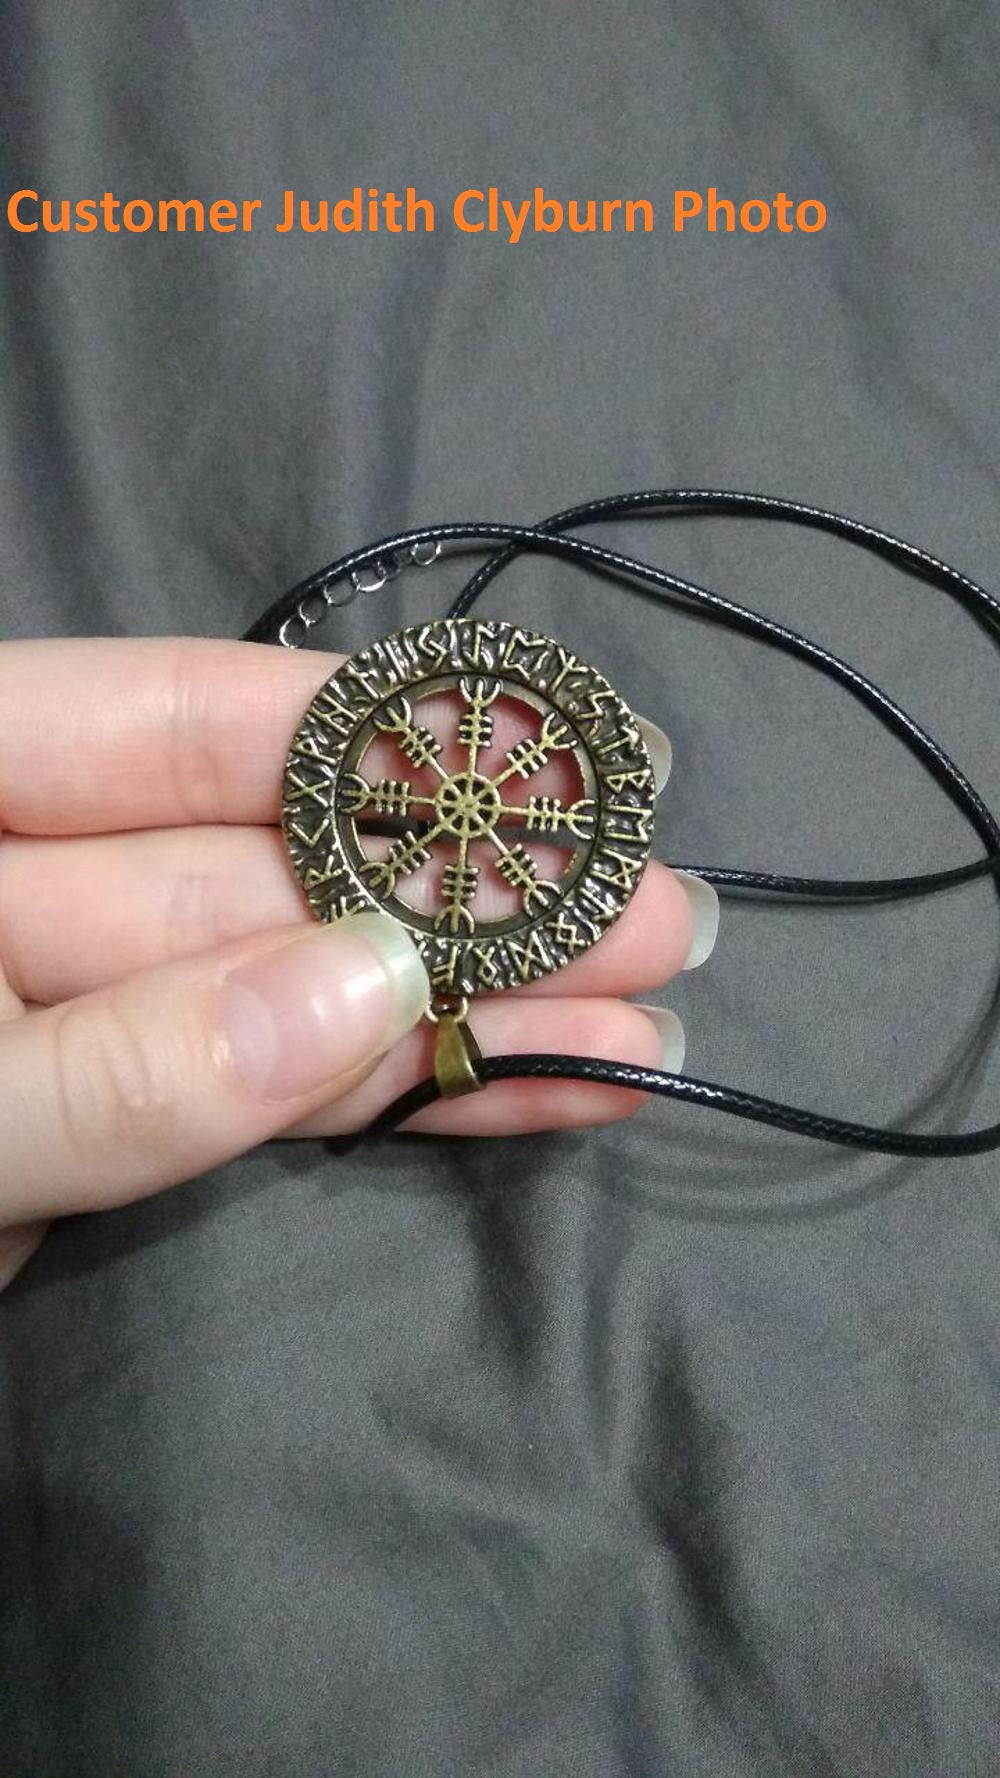 Helm of Awe With Runes Necklace